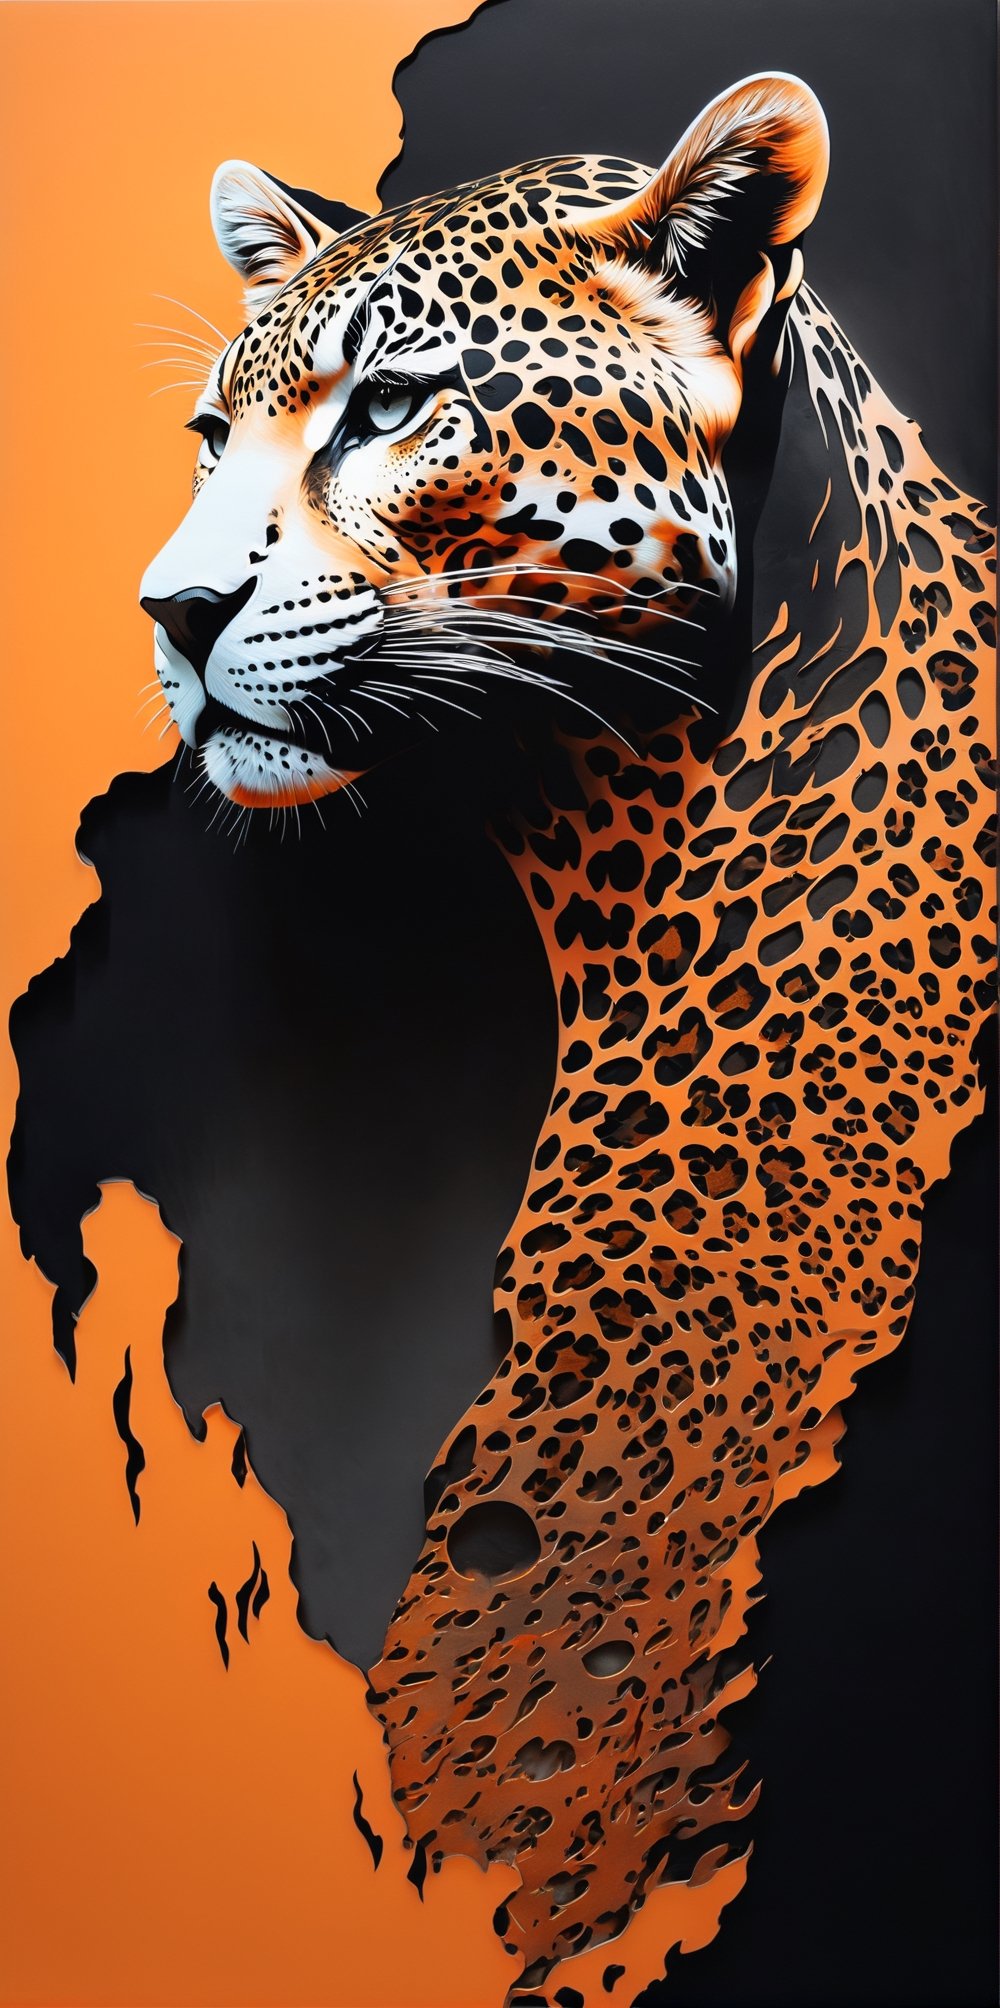 black, orange and white colors, (((A degraded and burned photographic image))) of an incredibly digital work of a hyperrealistic and detailed silhouette of a woman with an inverted jaguar pattern, 3D rendering, illustration, paintingv0.1 , portrait photography, 3d render, photo, typography, poster, architecture